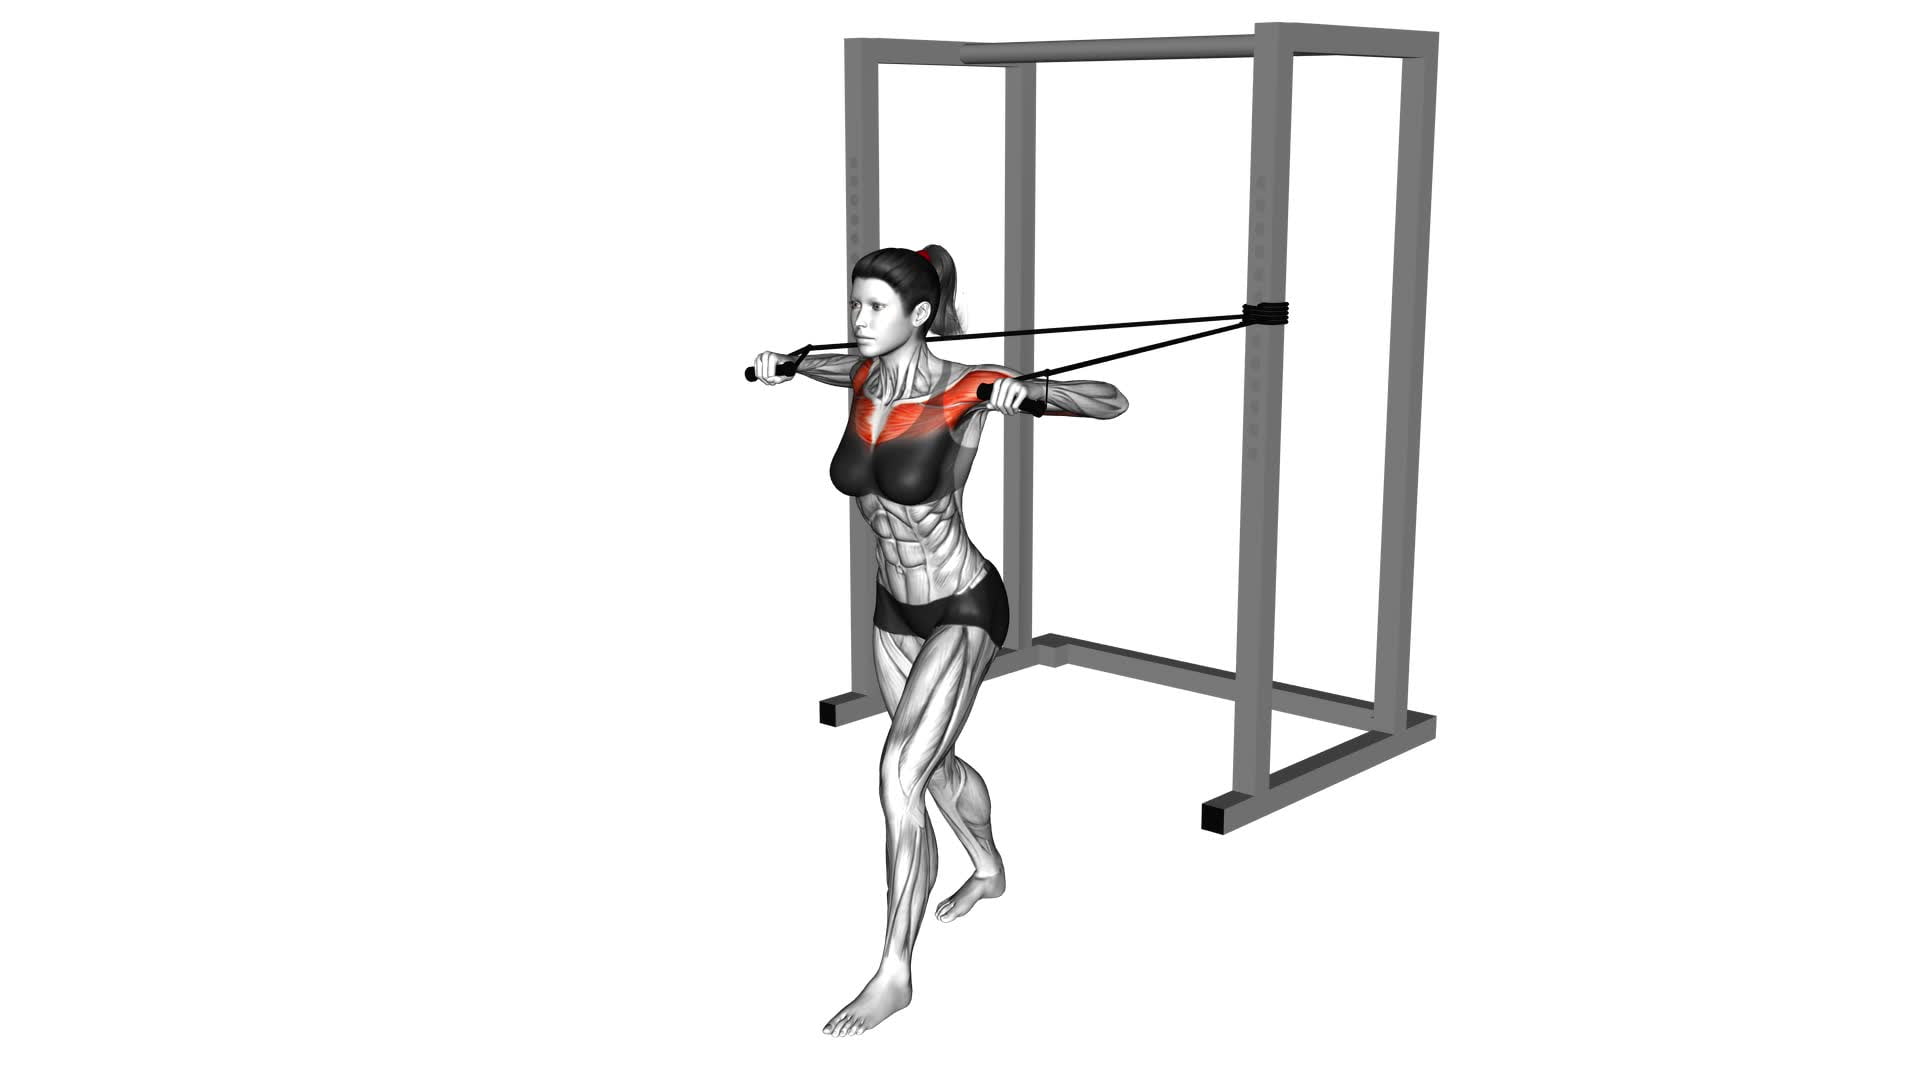 Band Standing Alternate Chest Press (female) - Video Exercise Guide & Tips